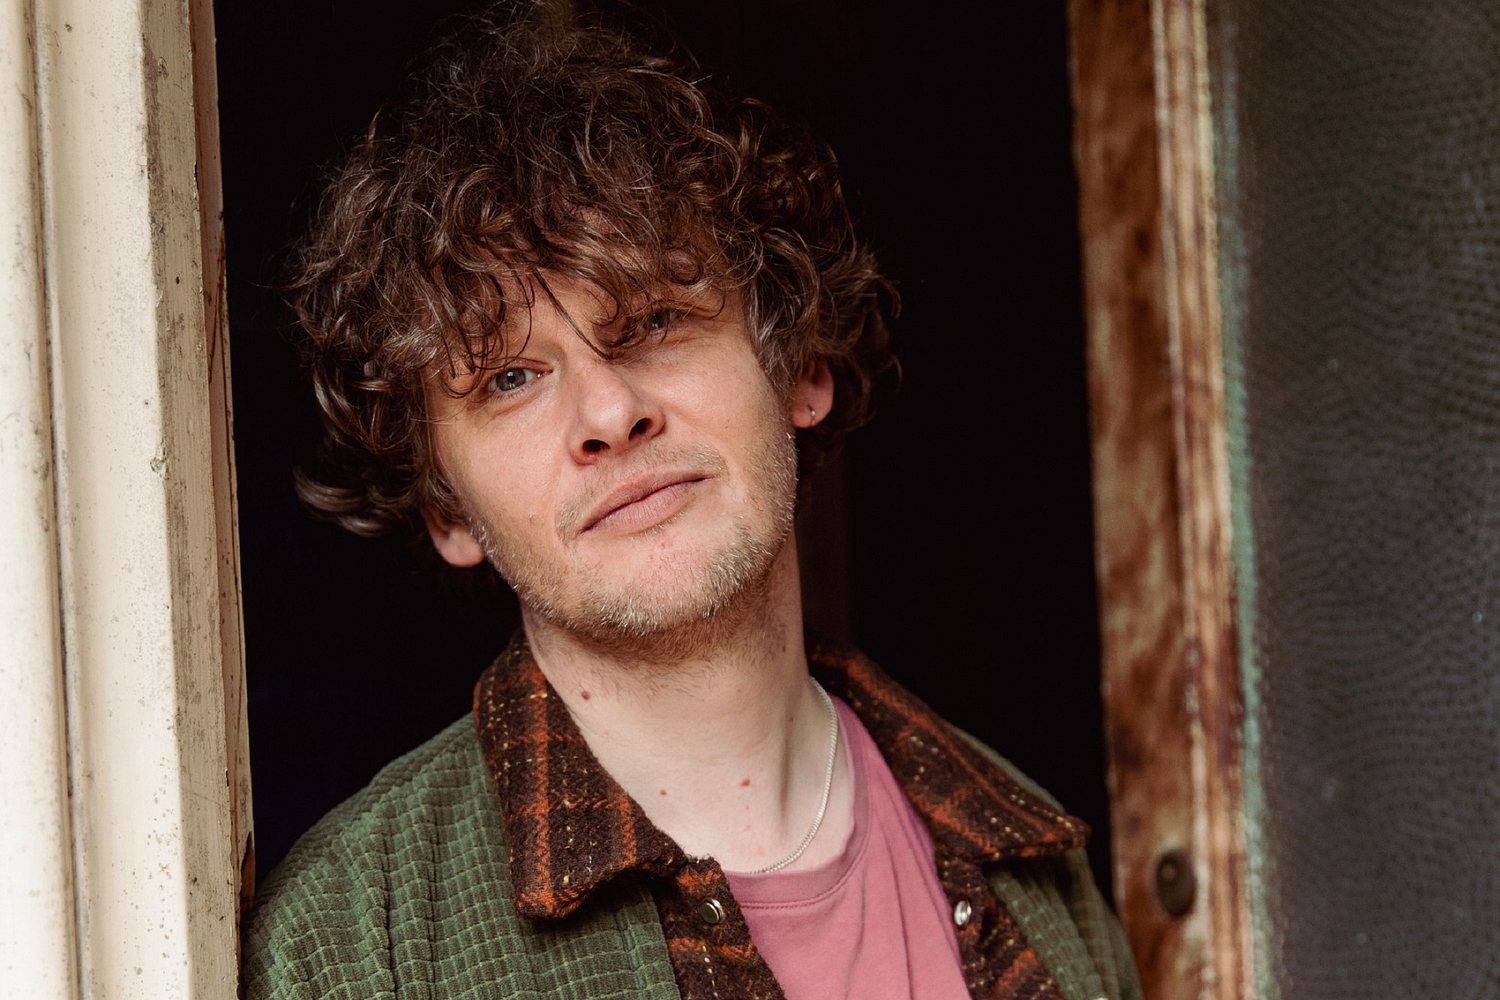 Bill Ryder-Jones releases new single 'If Tomorrow Starts Without Me'